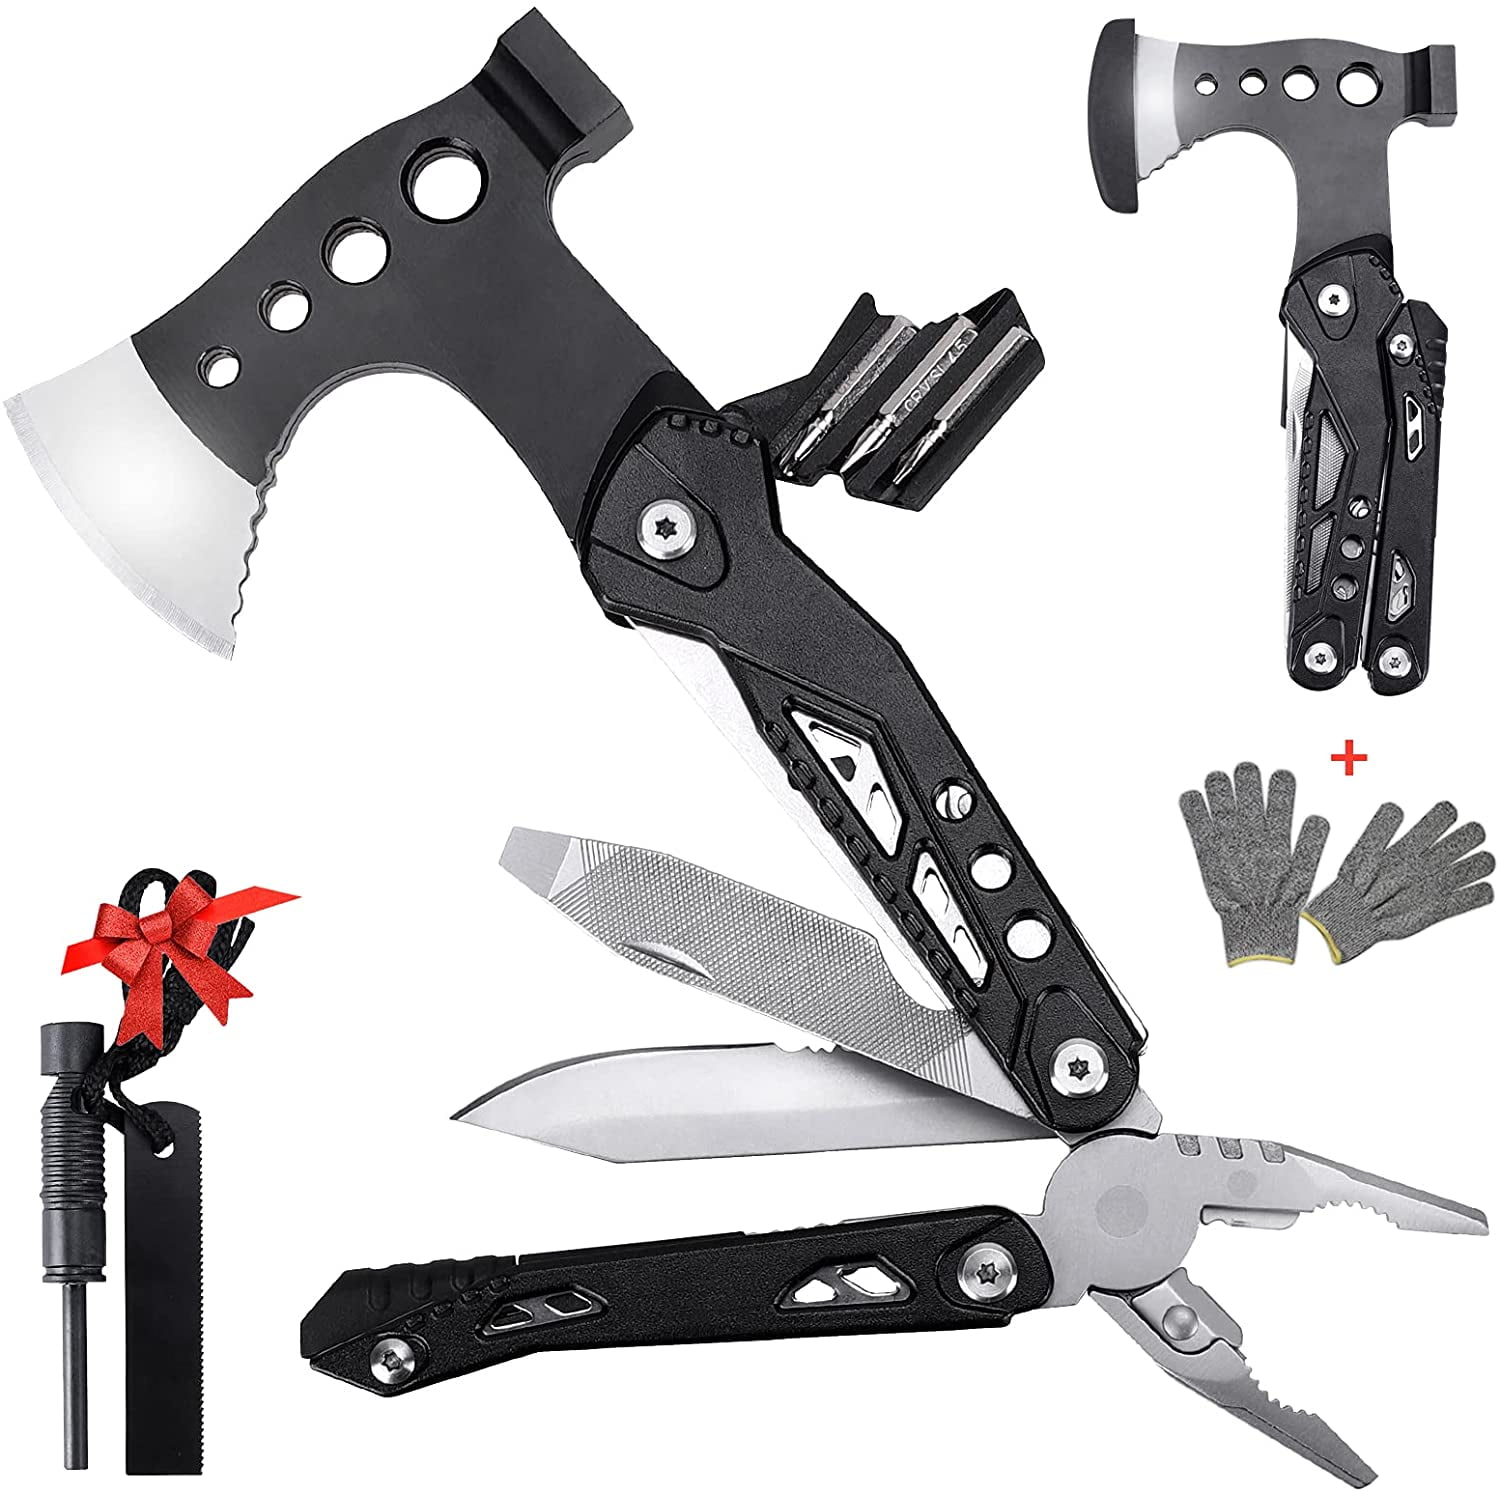 Dad　16　Multi　Multitool　Camping　Tool　Saw　Men　Gear　Gifts　Accessories　Hammer　Bottle　For　Axe　Opener　In　Pliers　Upgraded　Survival　With　Screwdrivers